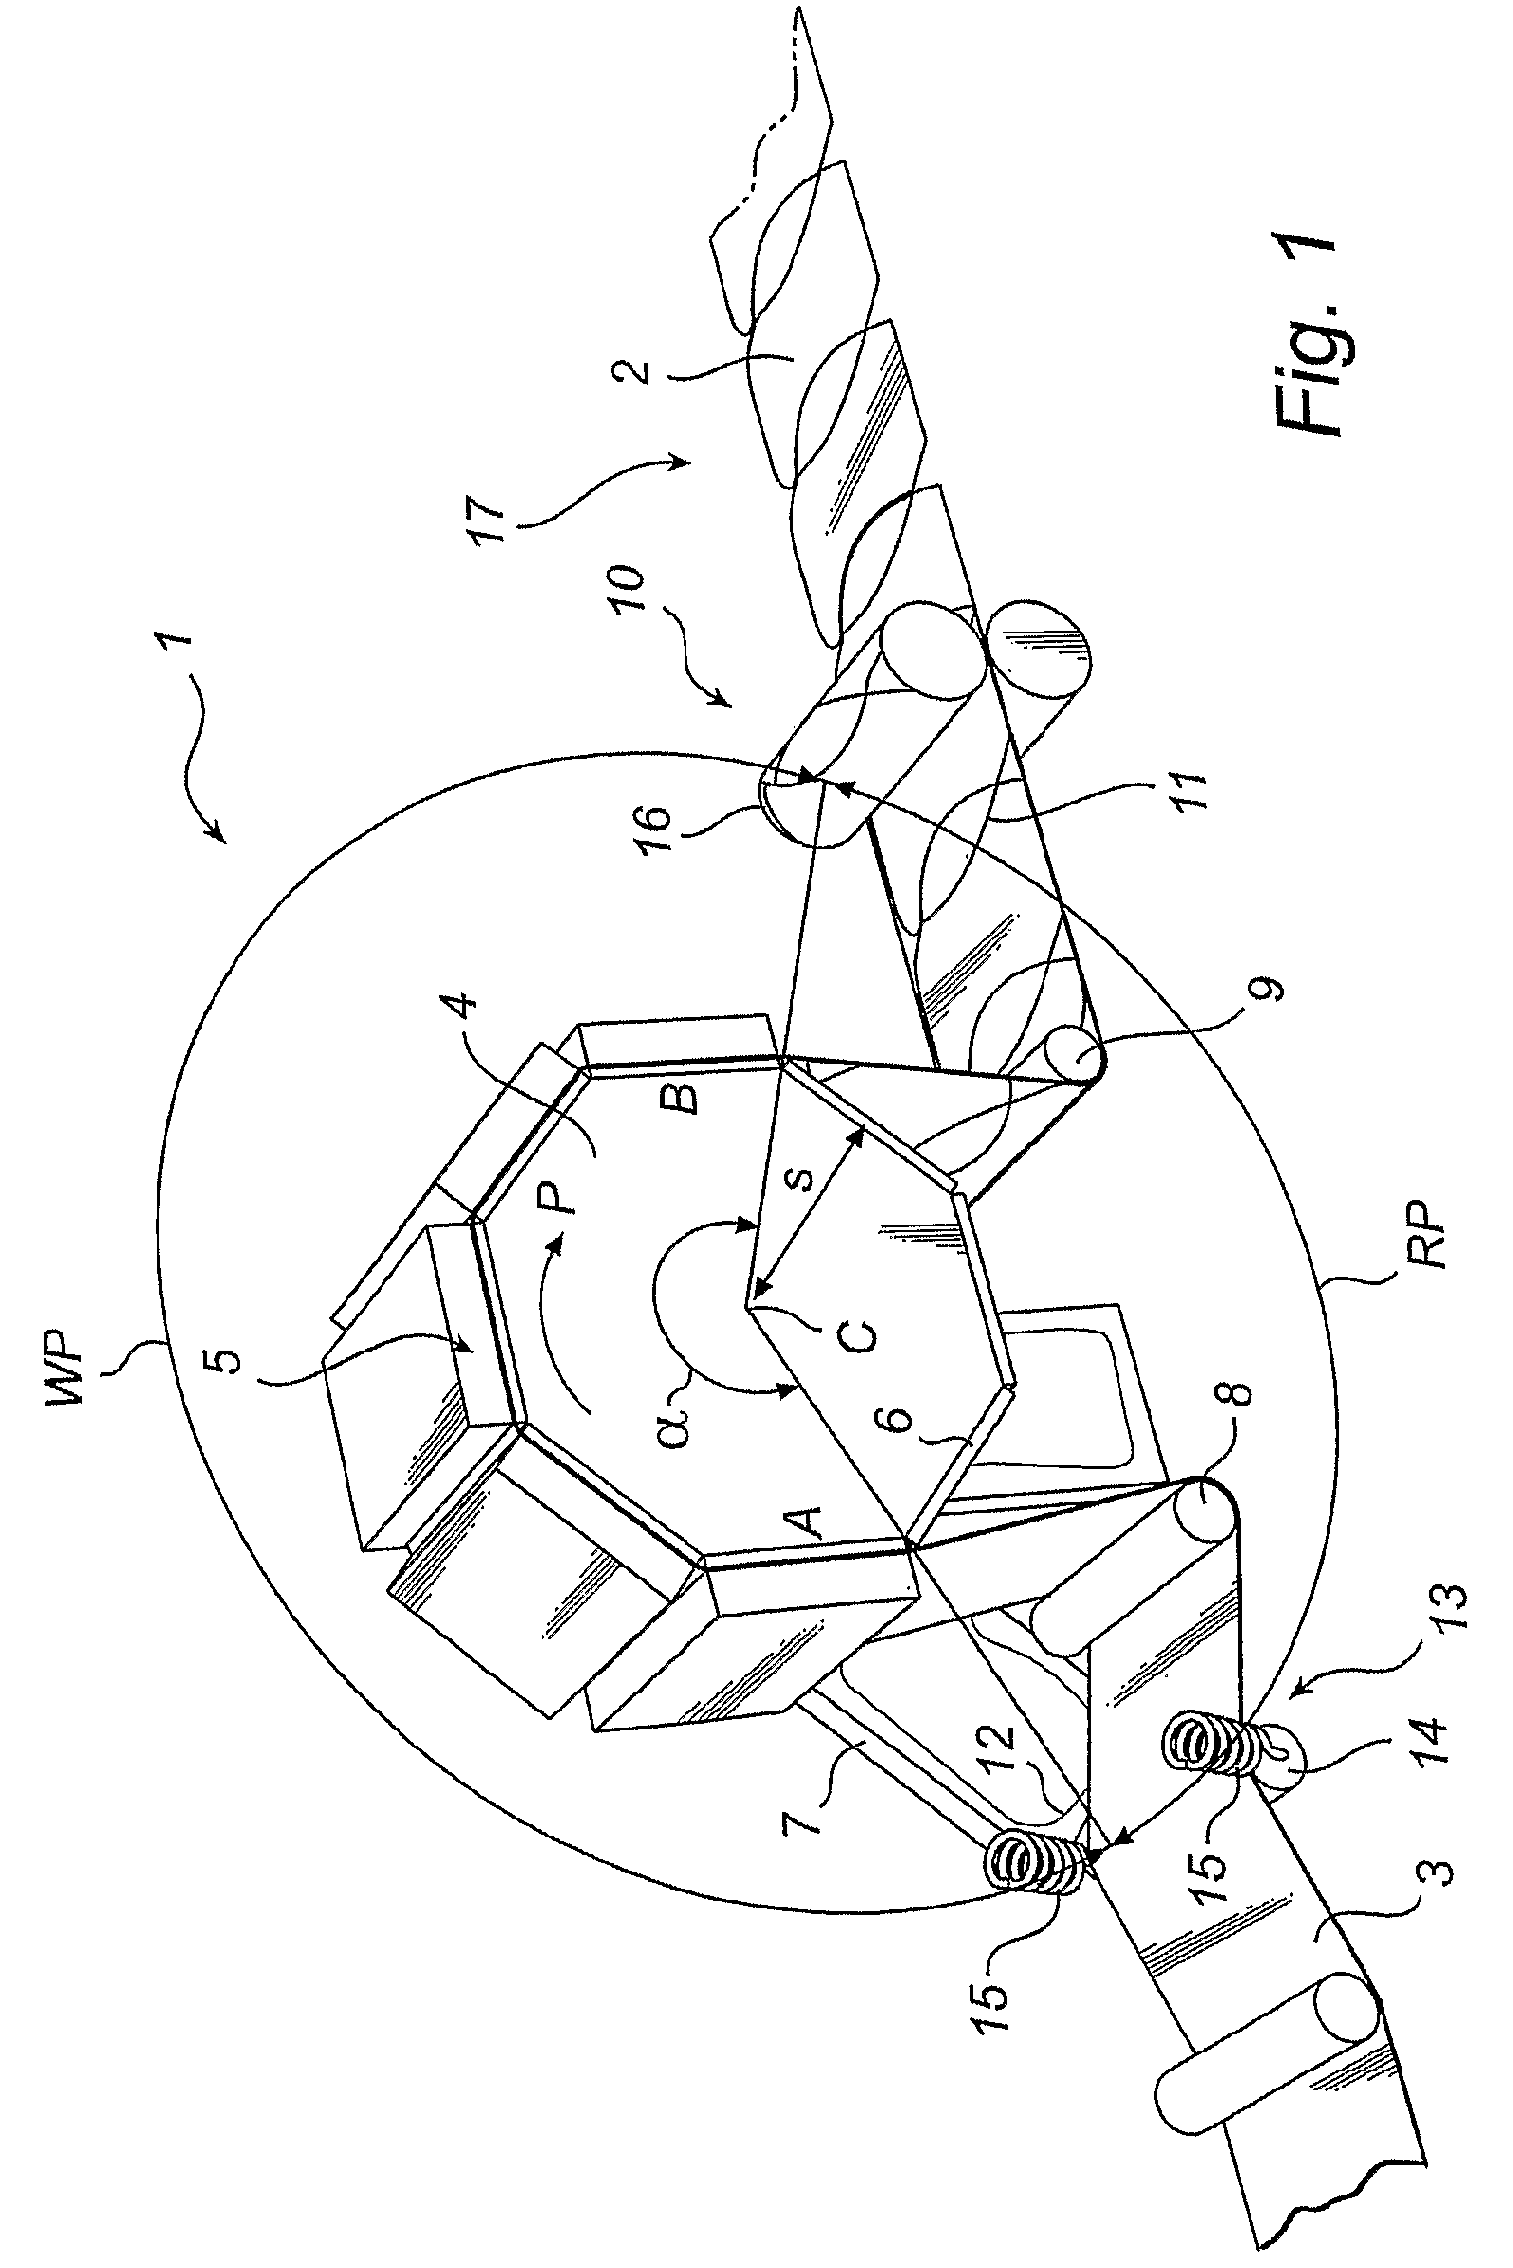 Device and method for producing container blanks